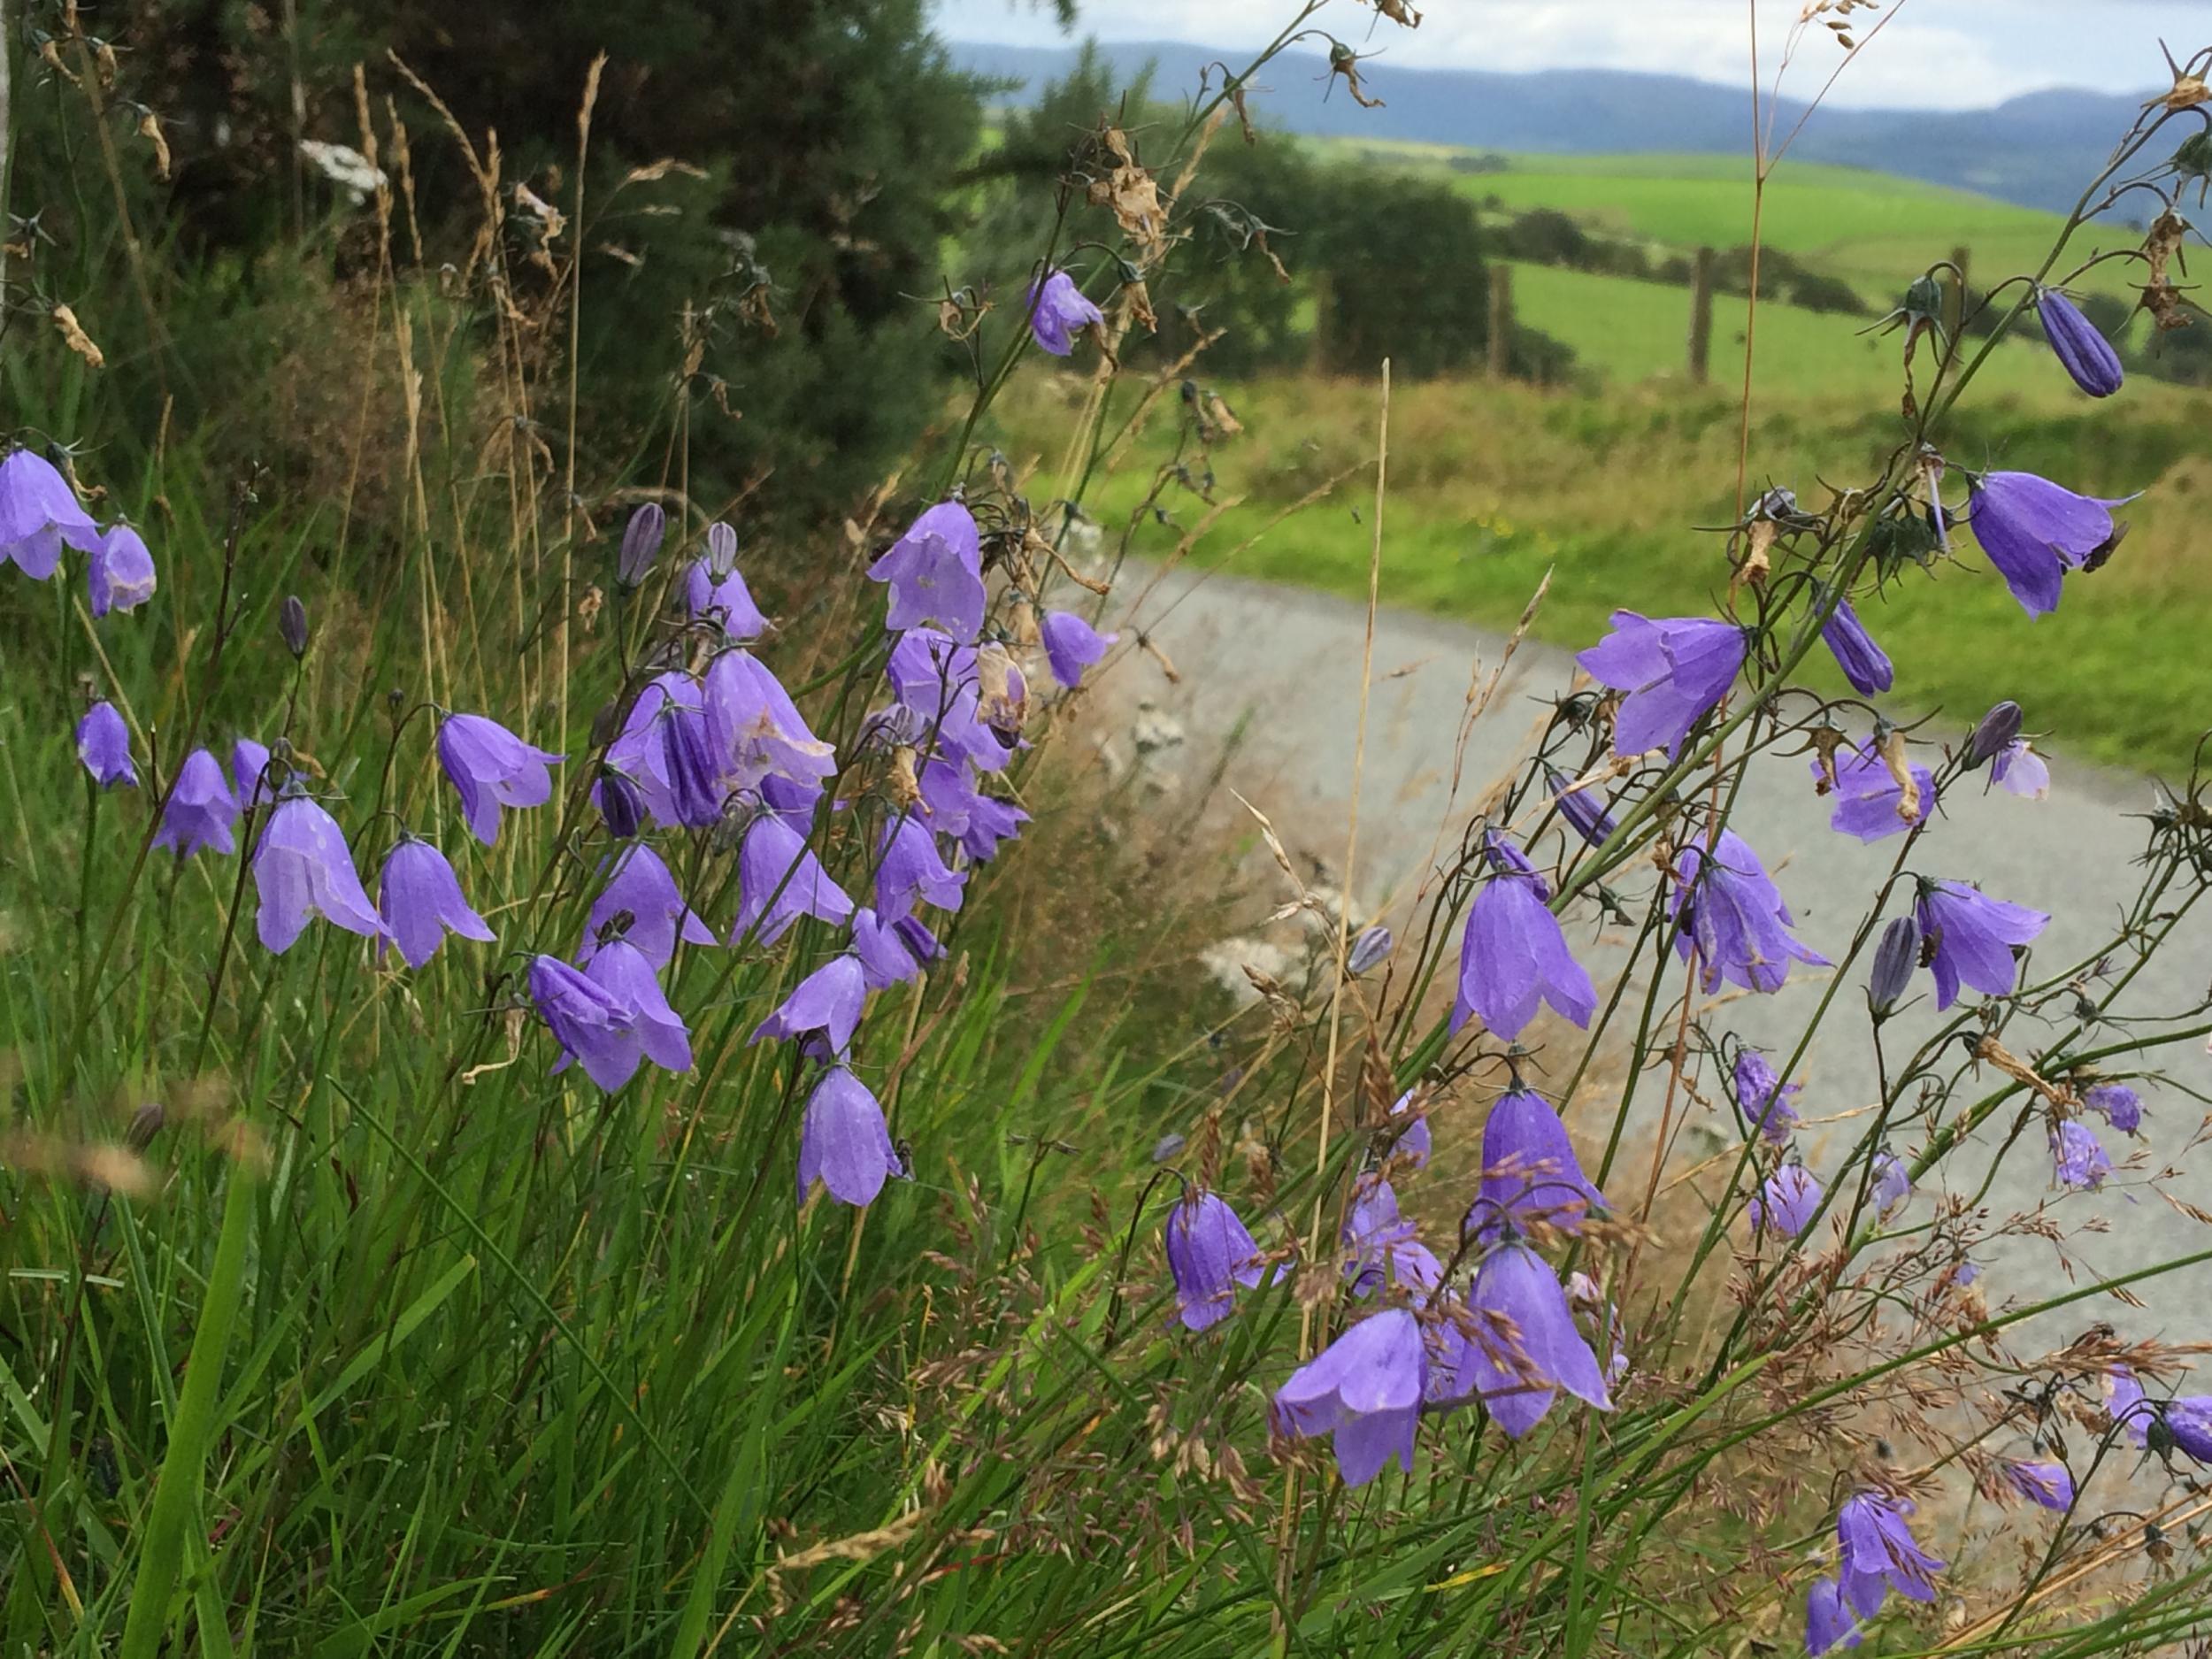 Harebells are among the flowering plants threatened by air pollution